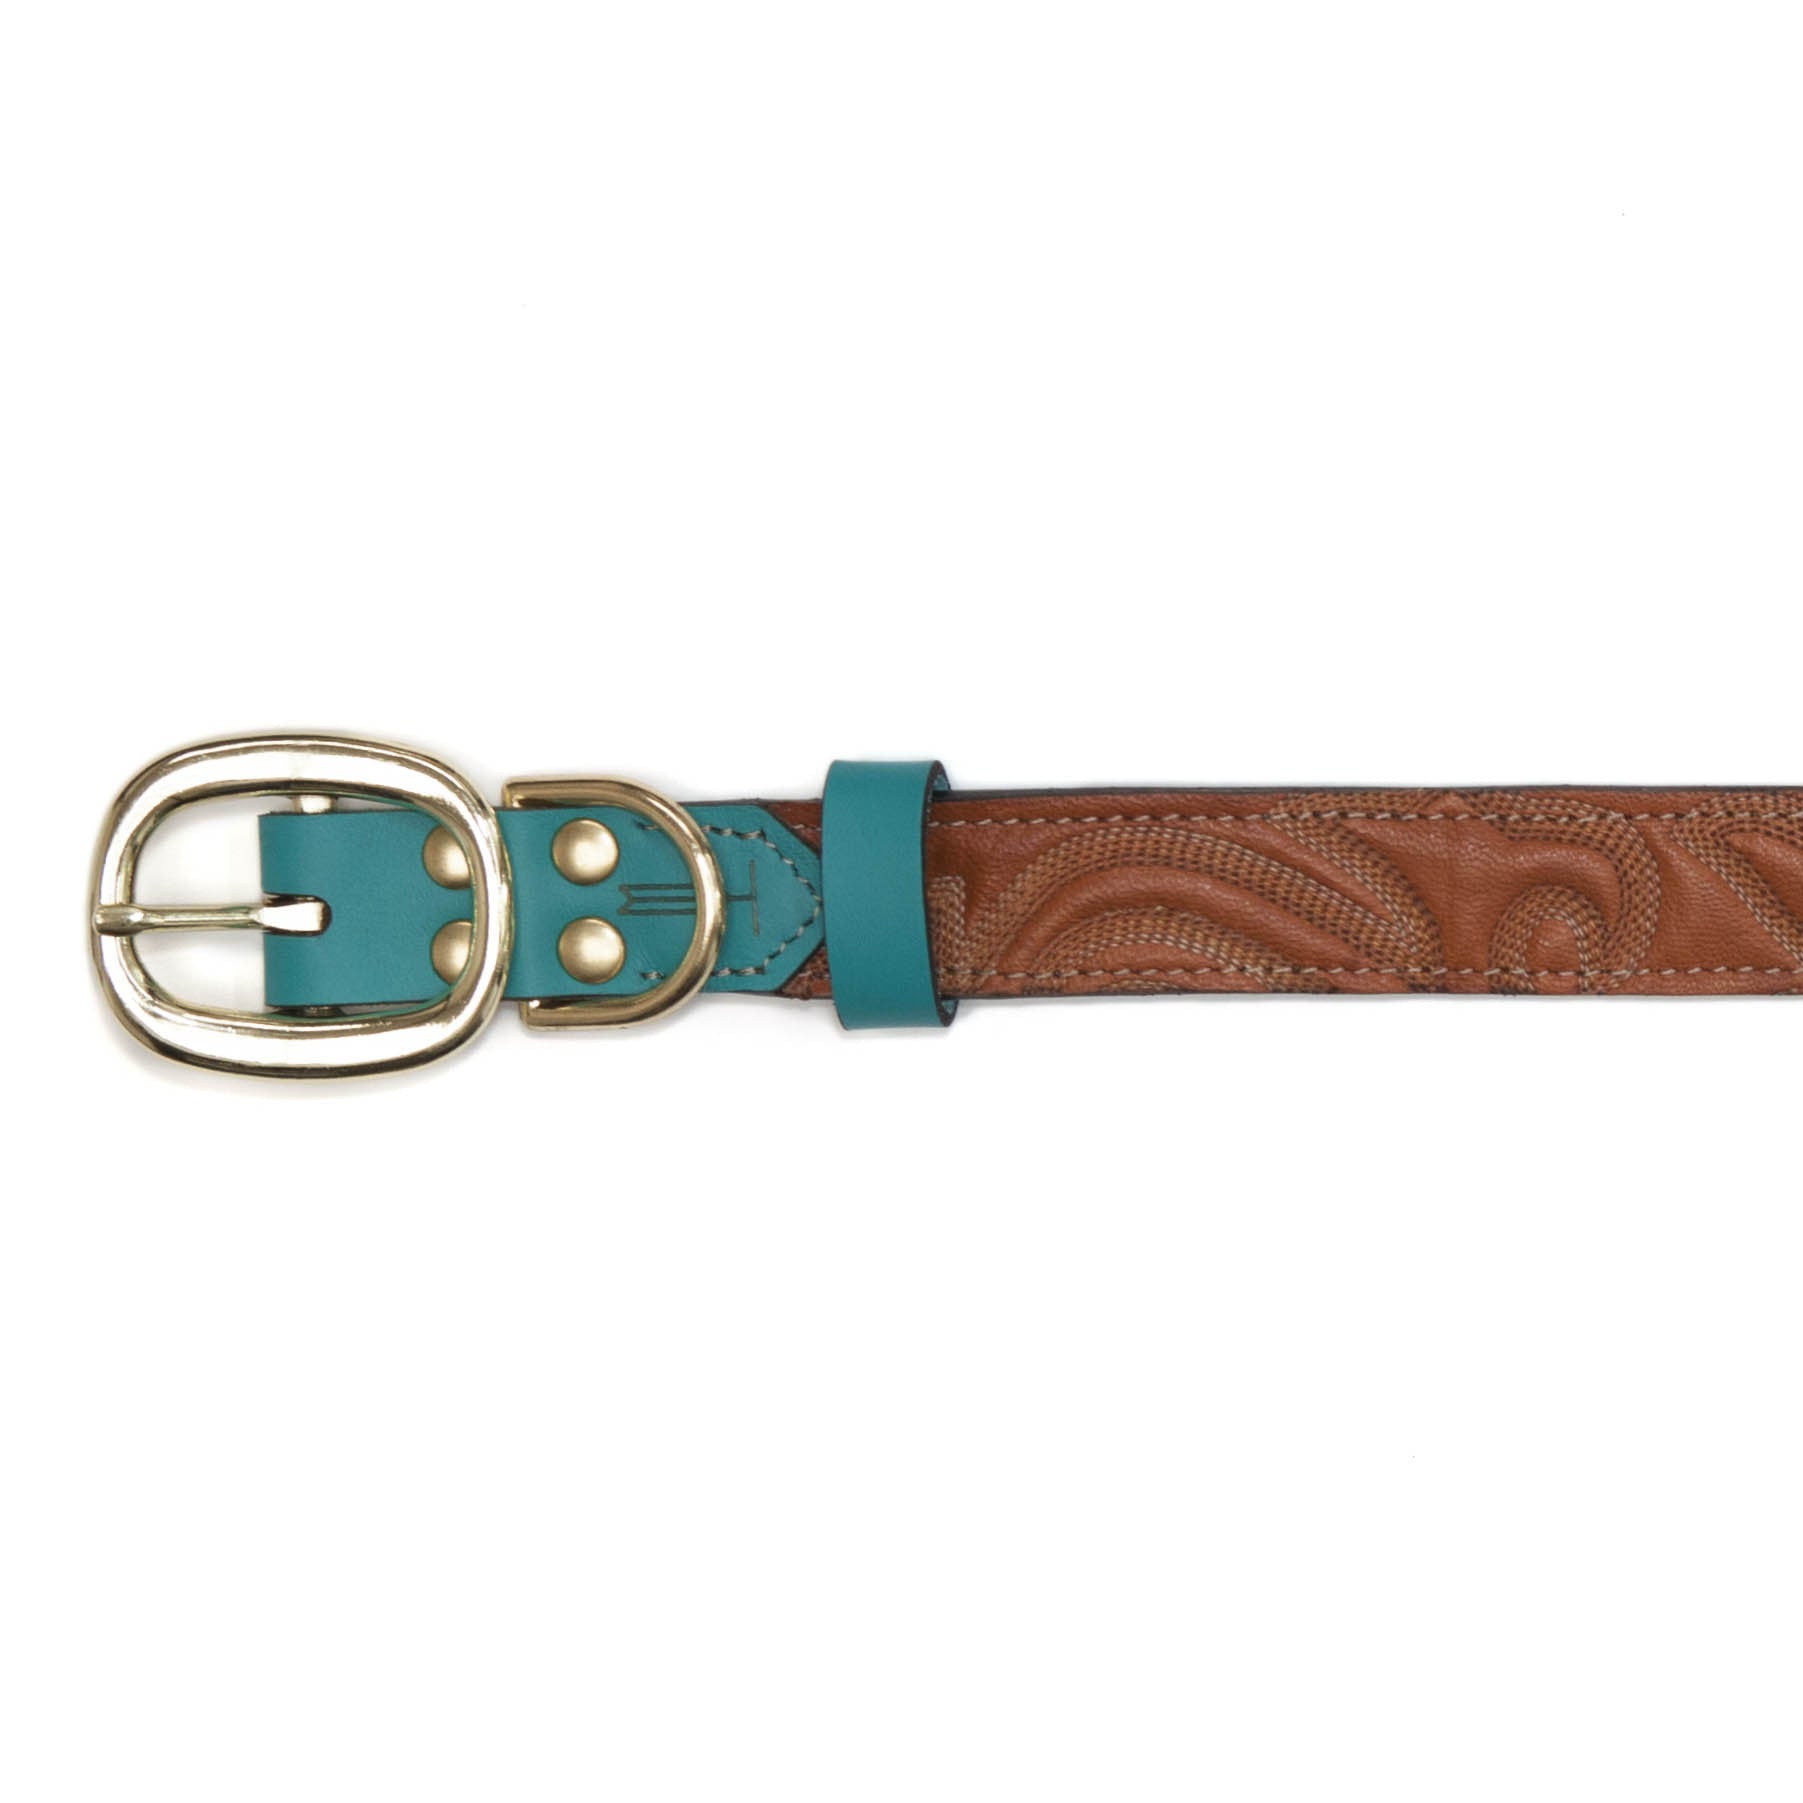 Turquoise Dog Collar with Brown Leather + Tan Stitching (buckle)